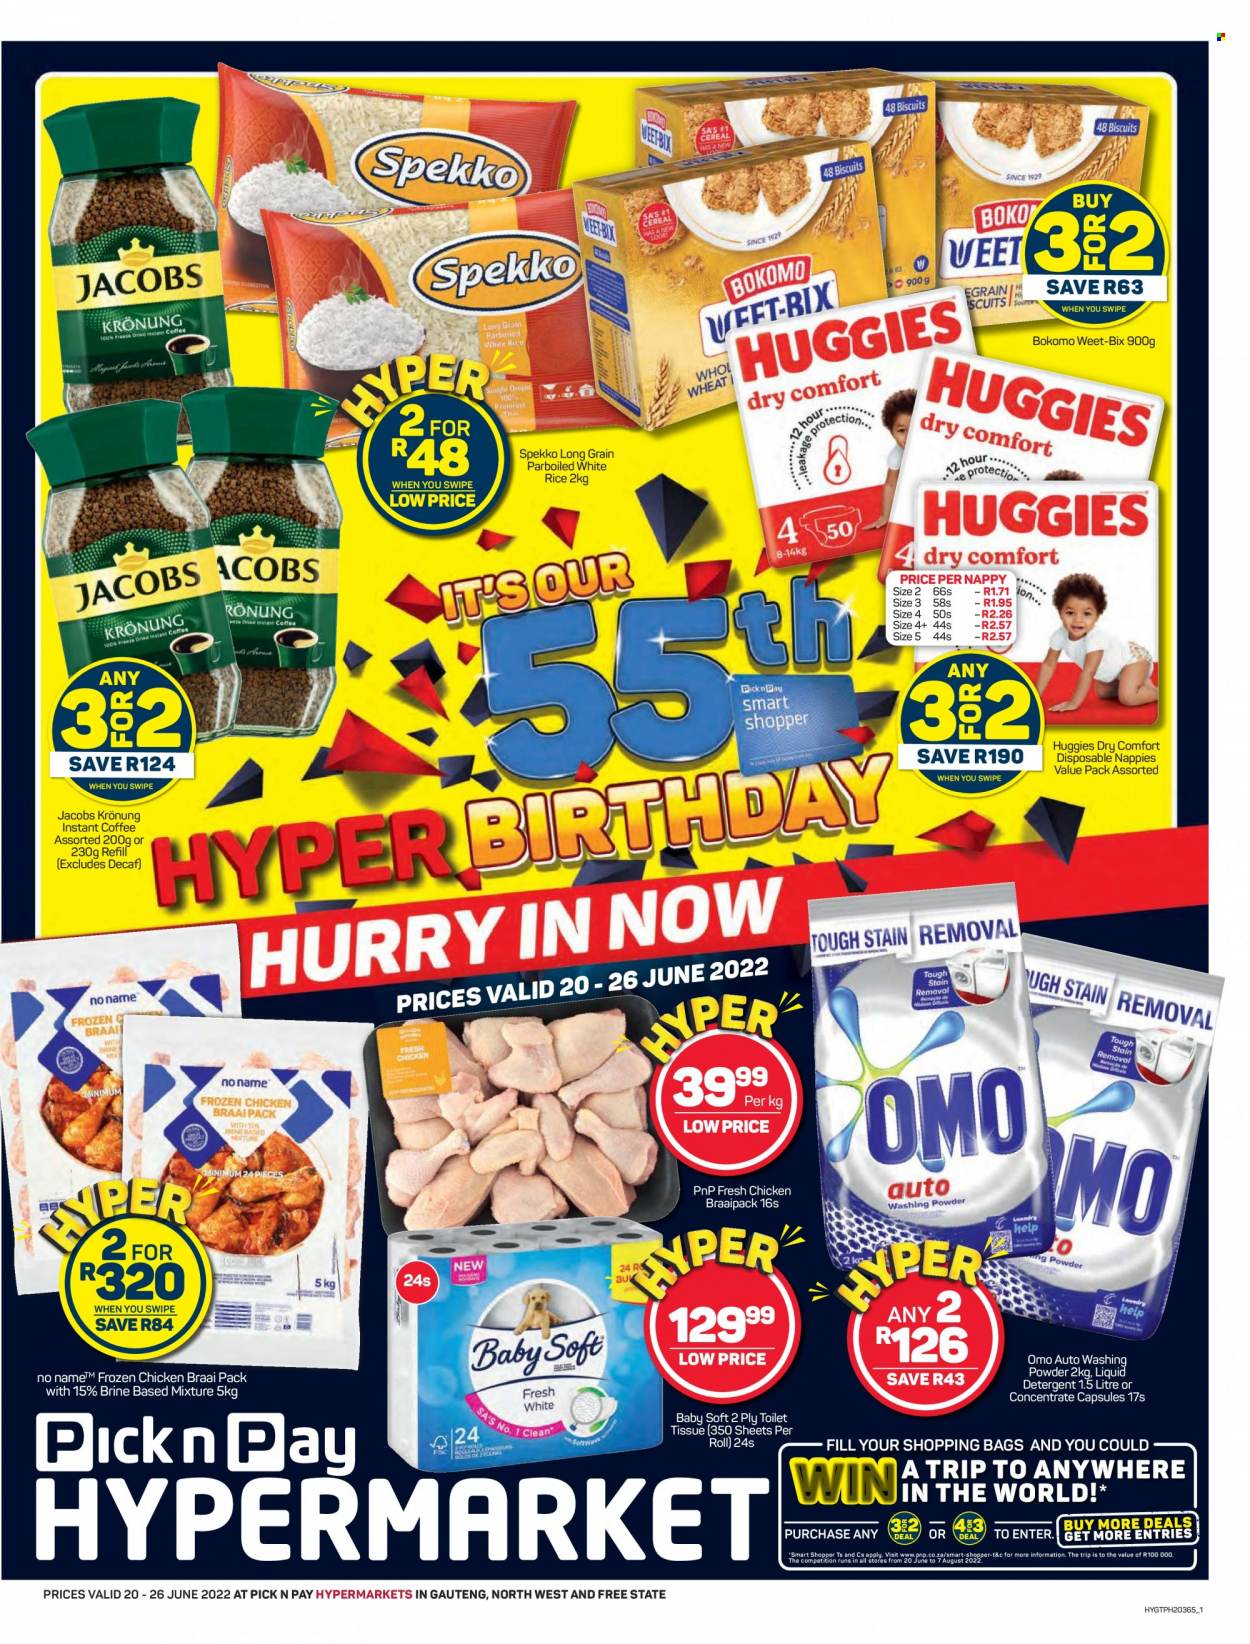 Pick n Pay Hypermarket catalogue  - 20/06/2022 - 26/06/2022 - Sales products - cereal bar, Weet-Bix, rice, white rice, Spekko, instant coffee, Jacobs, Jacobs Krönung, chicken meat, Huggies, nappies, Baby Soft, toilet paper, detergent, Omo, liquid detergent, laundry powder, bag. Page 1.